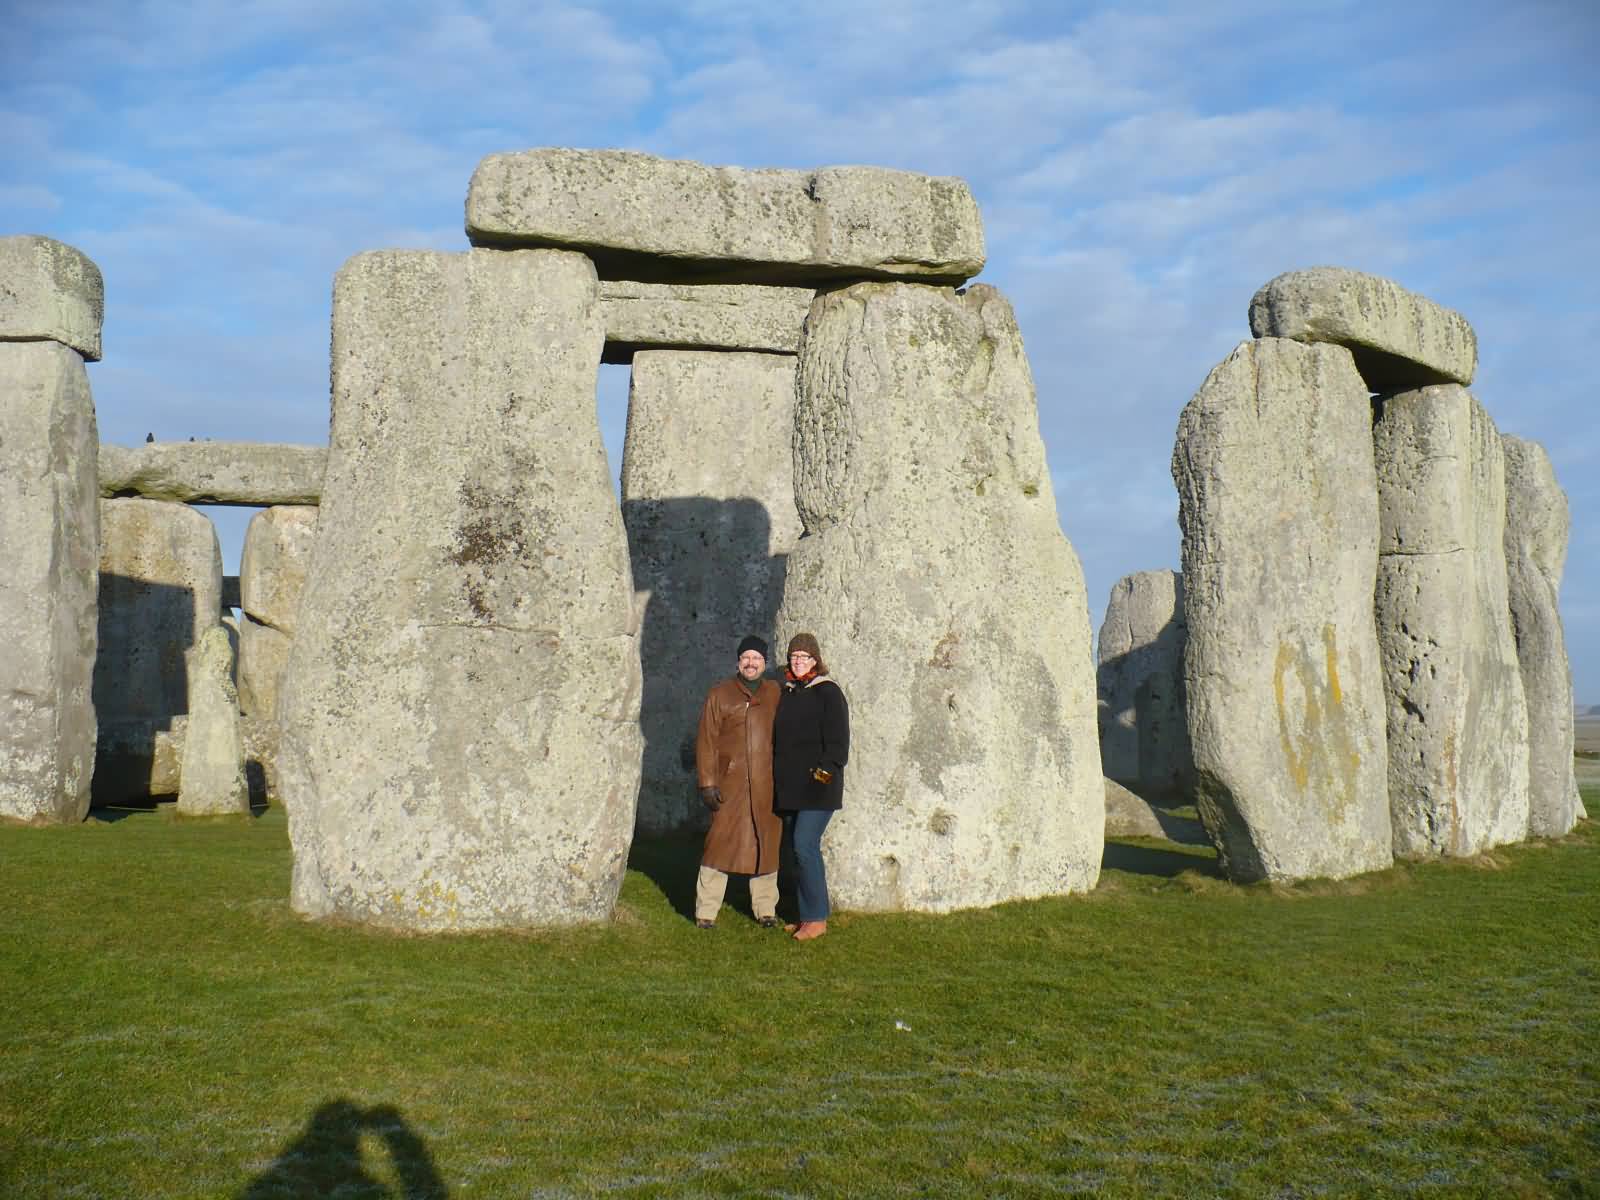 Couple Posing For Photograph With Stonehenge